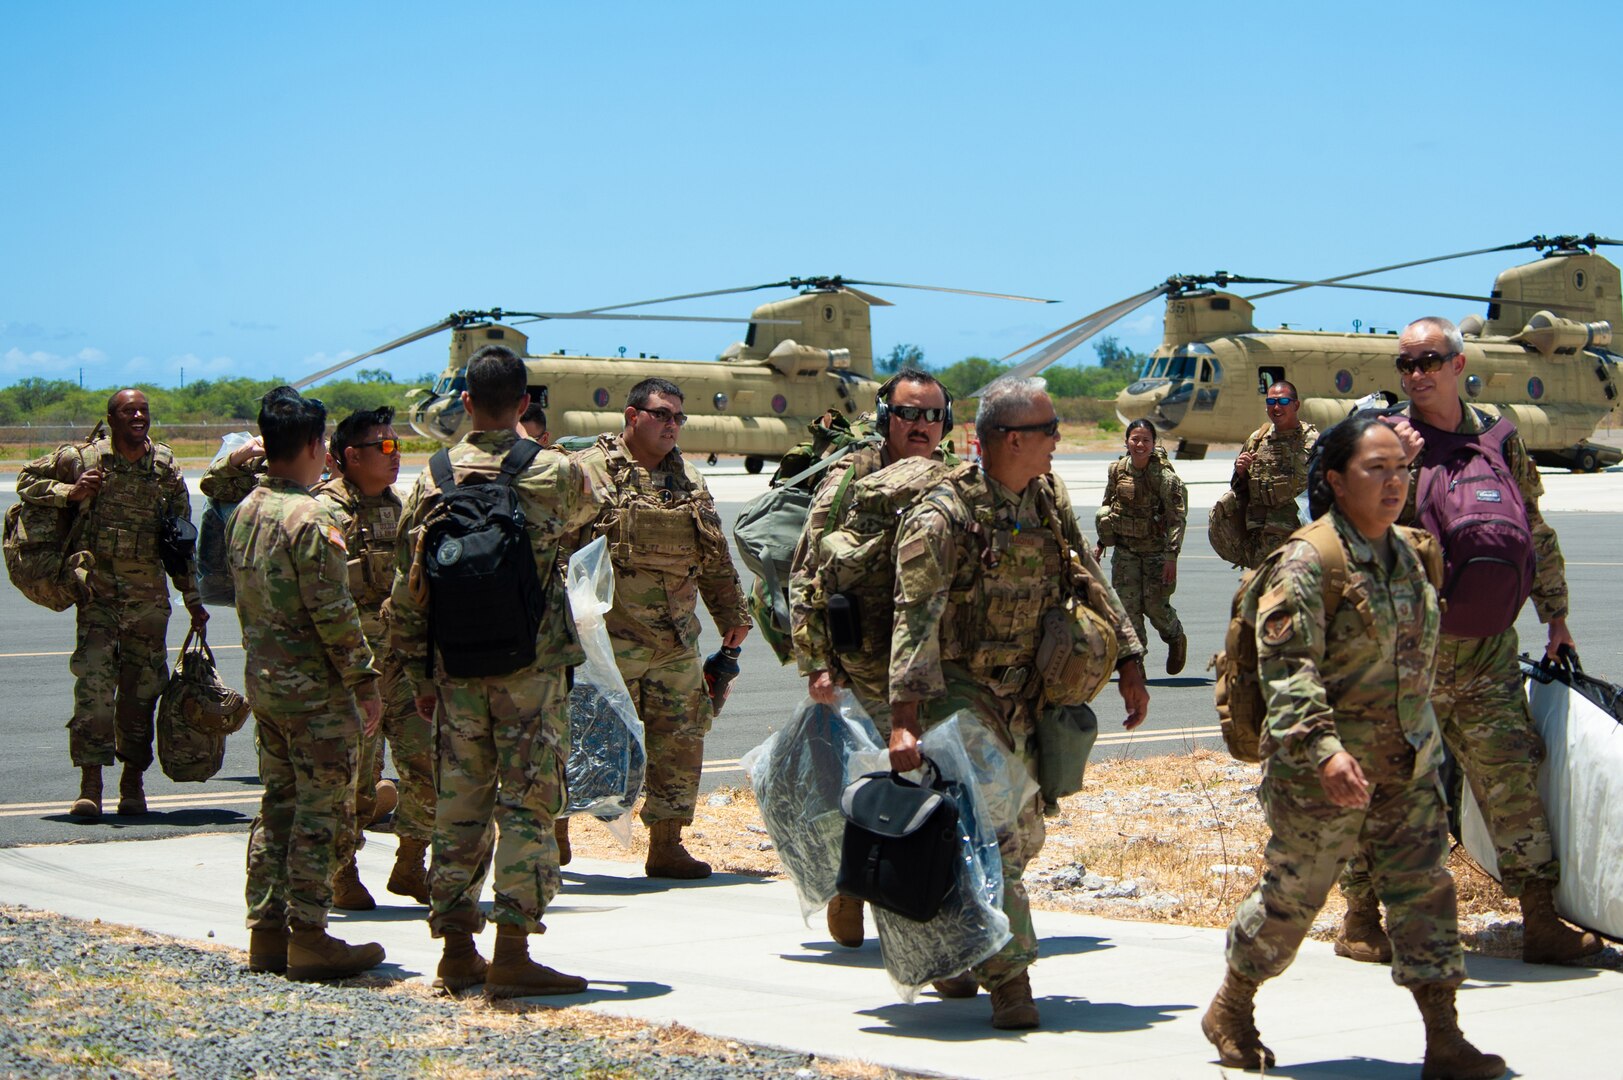 A group of service members carry packs as they walk away from two helicopters.